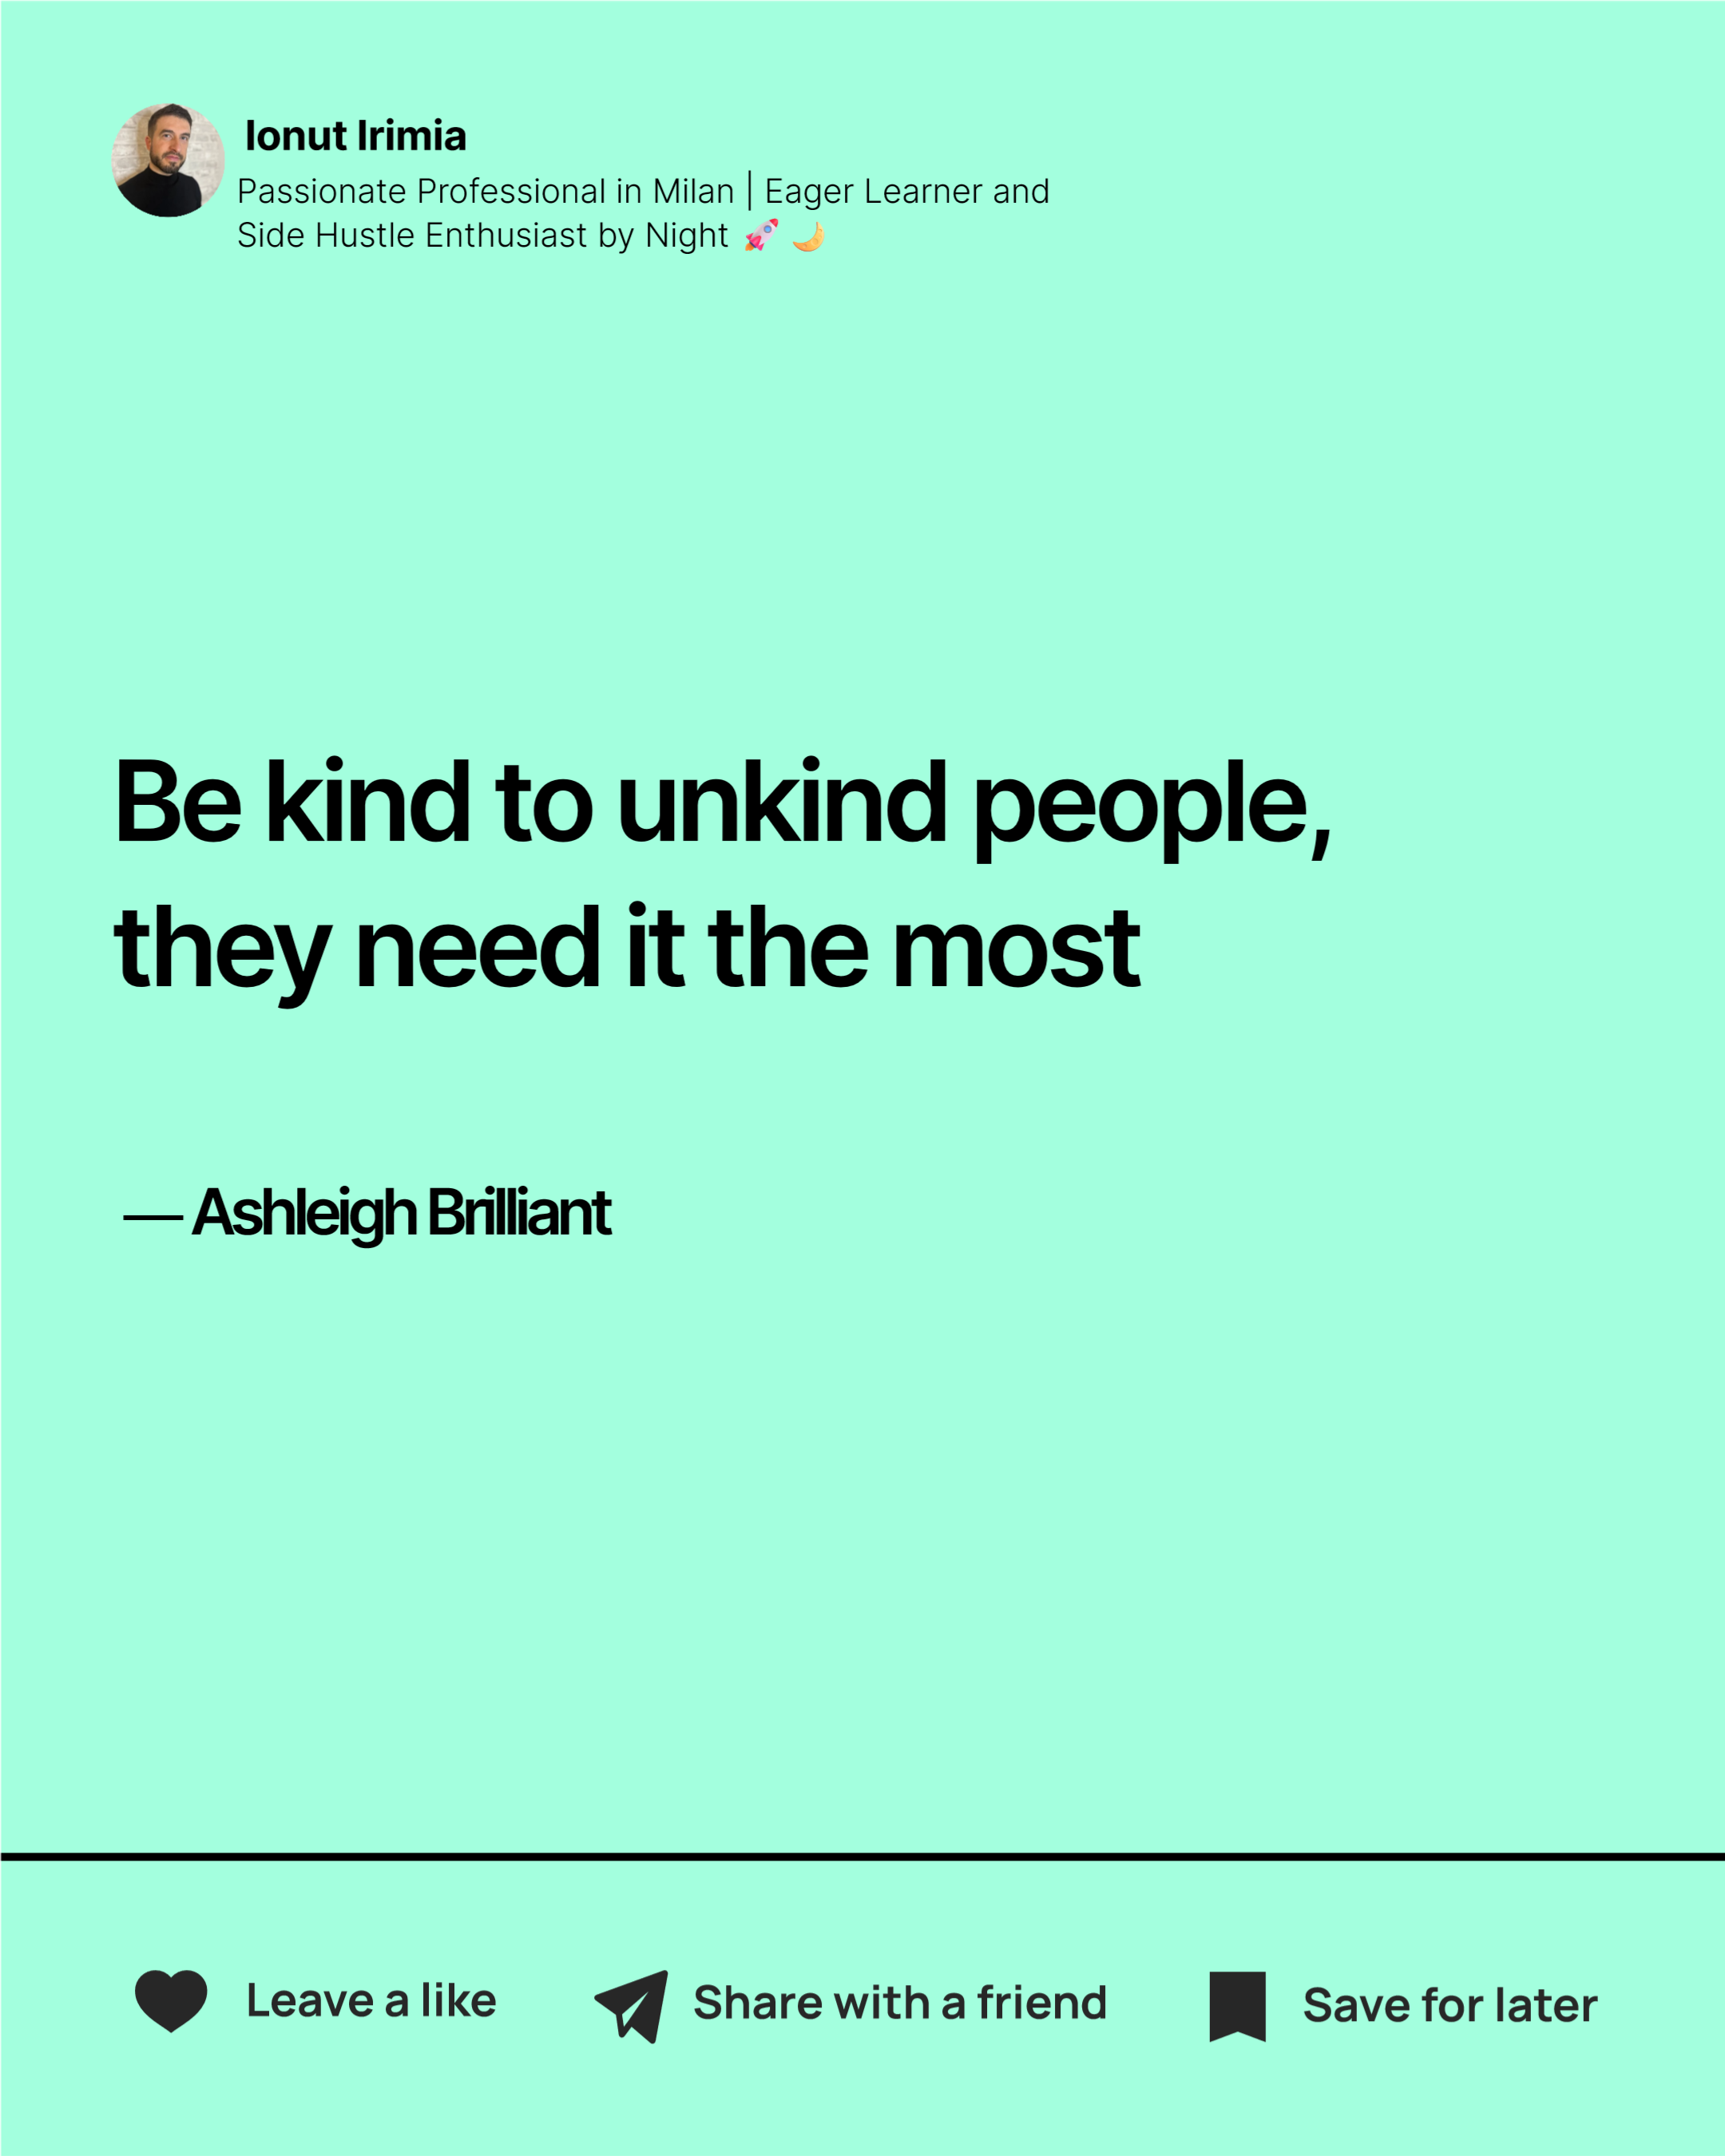 Ashleigh Brilliant — 'Be kind to unkind people. They need it the most.'